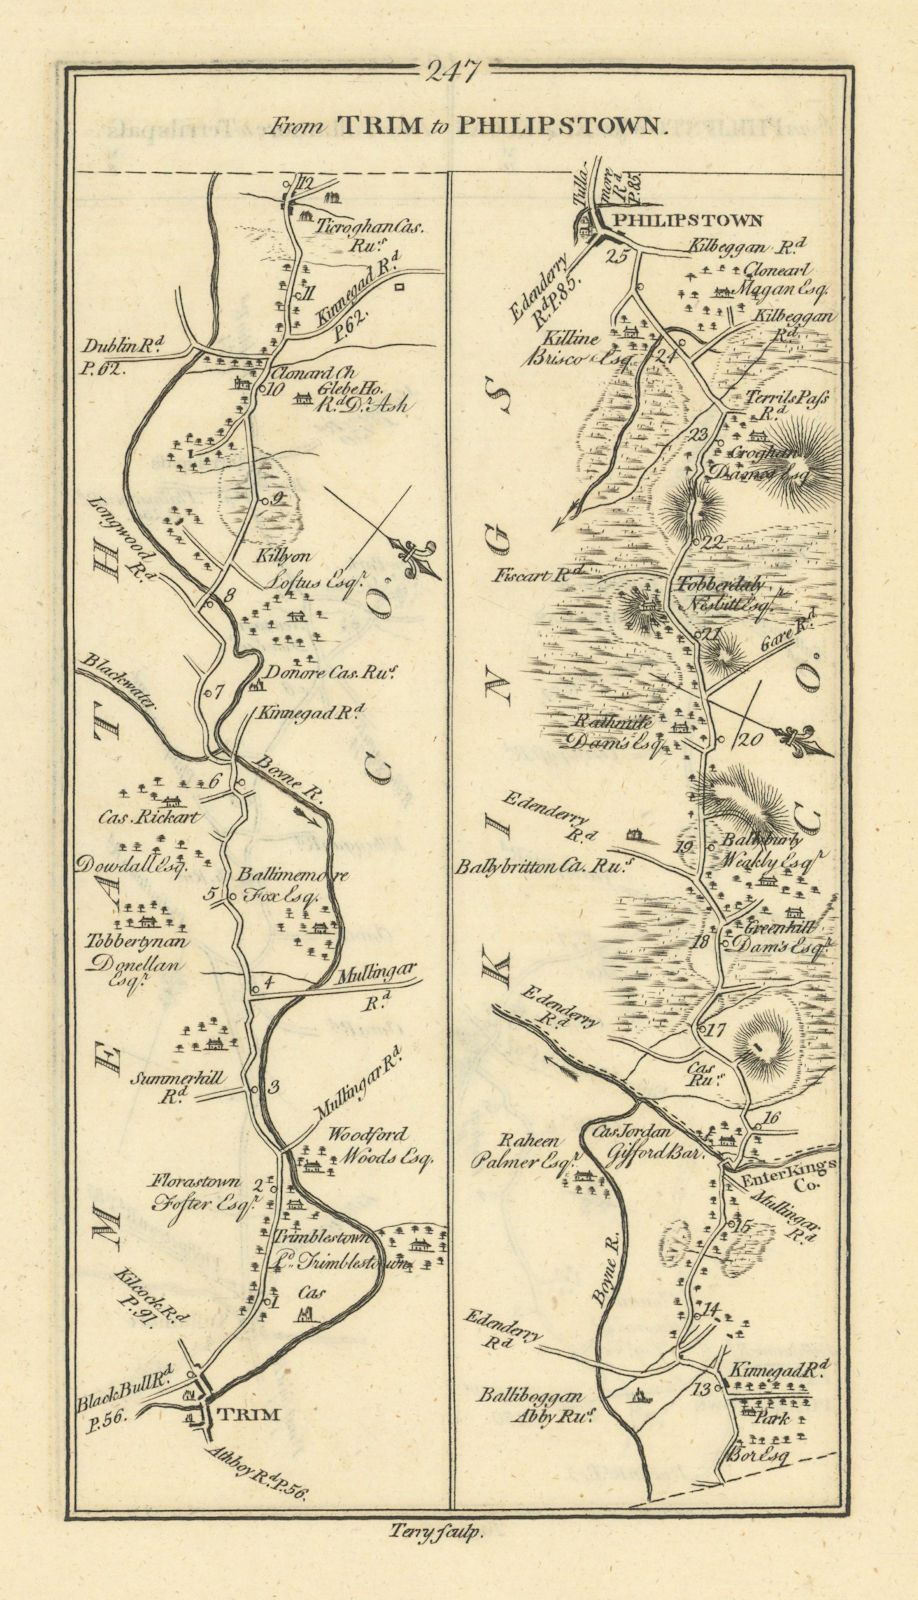 Associate Product #247 From Trim to Philipstown. Daingean Offaly Meath. TAYLOR/SKINNER 1778 map